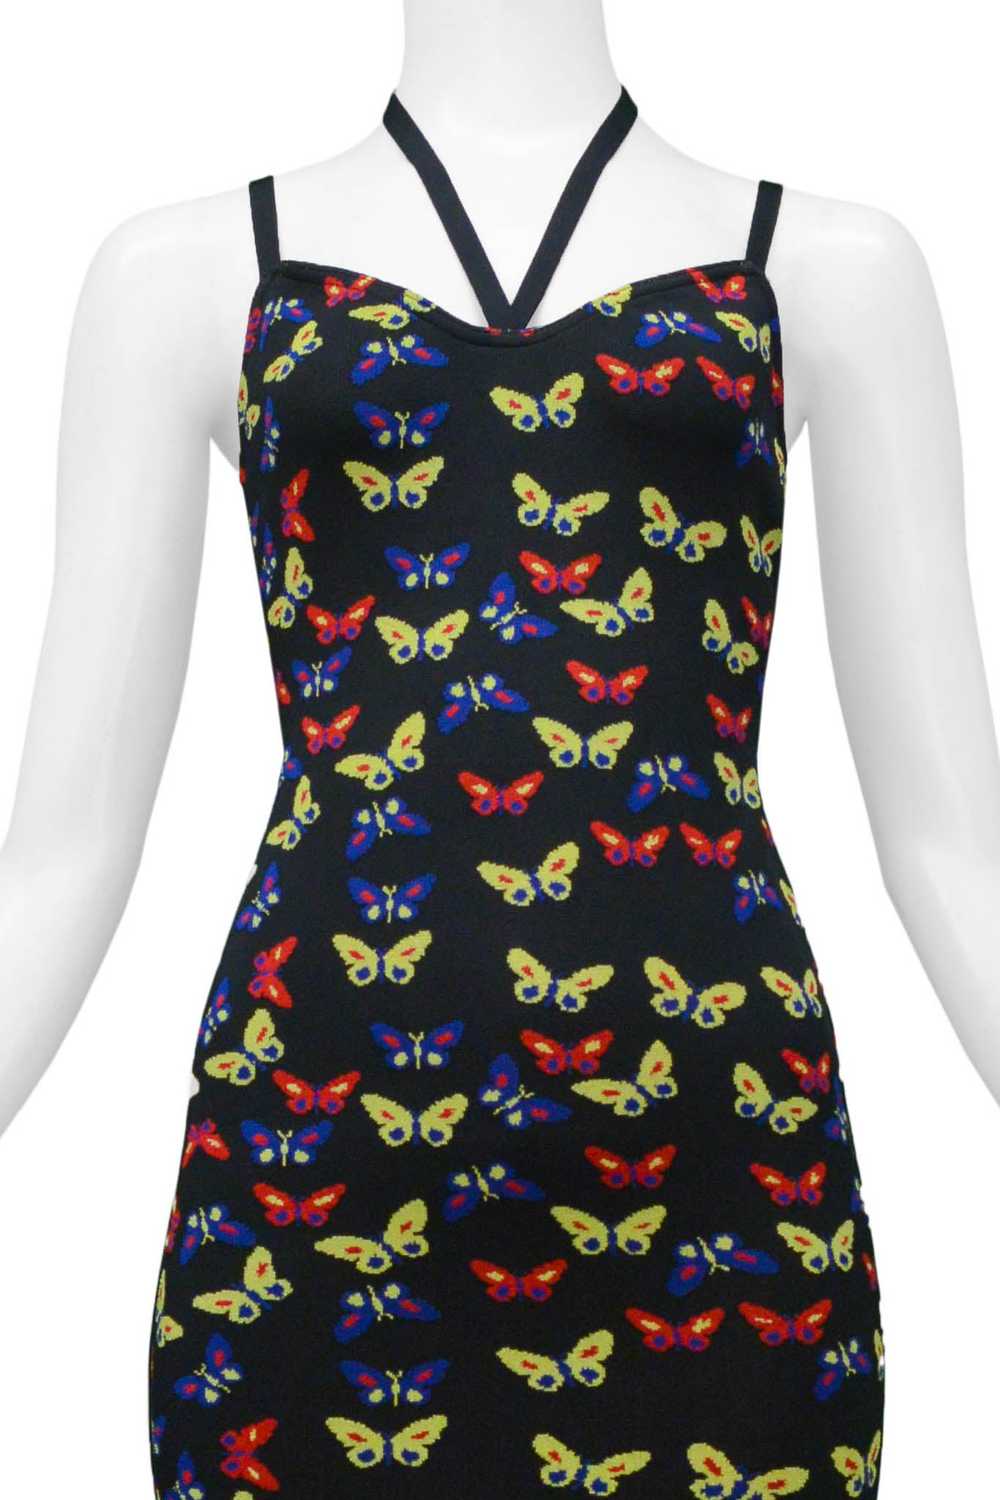 ALAIA ICONIC BUTTERFLY PRINT KNIT DRESS 1991 - image 4